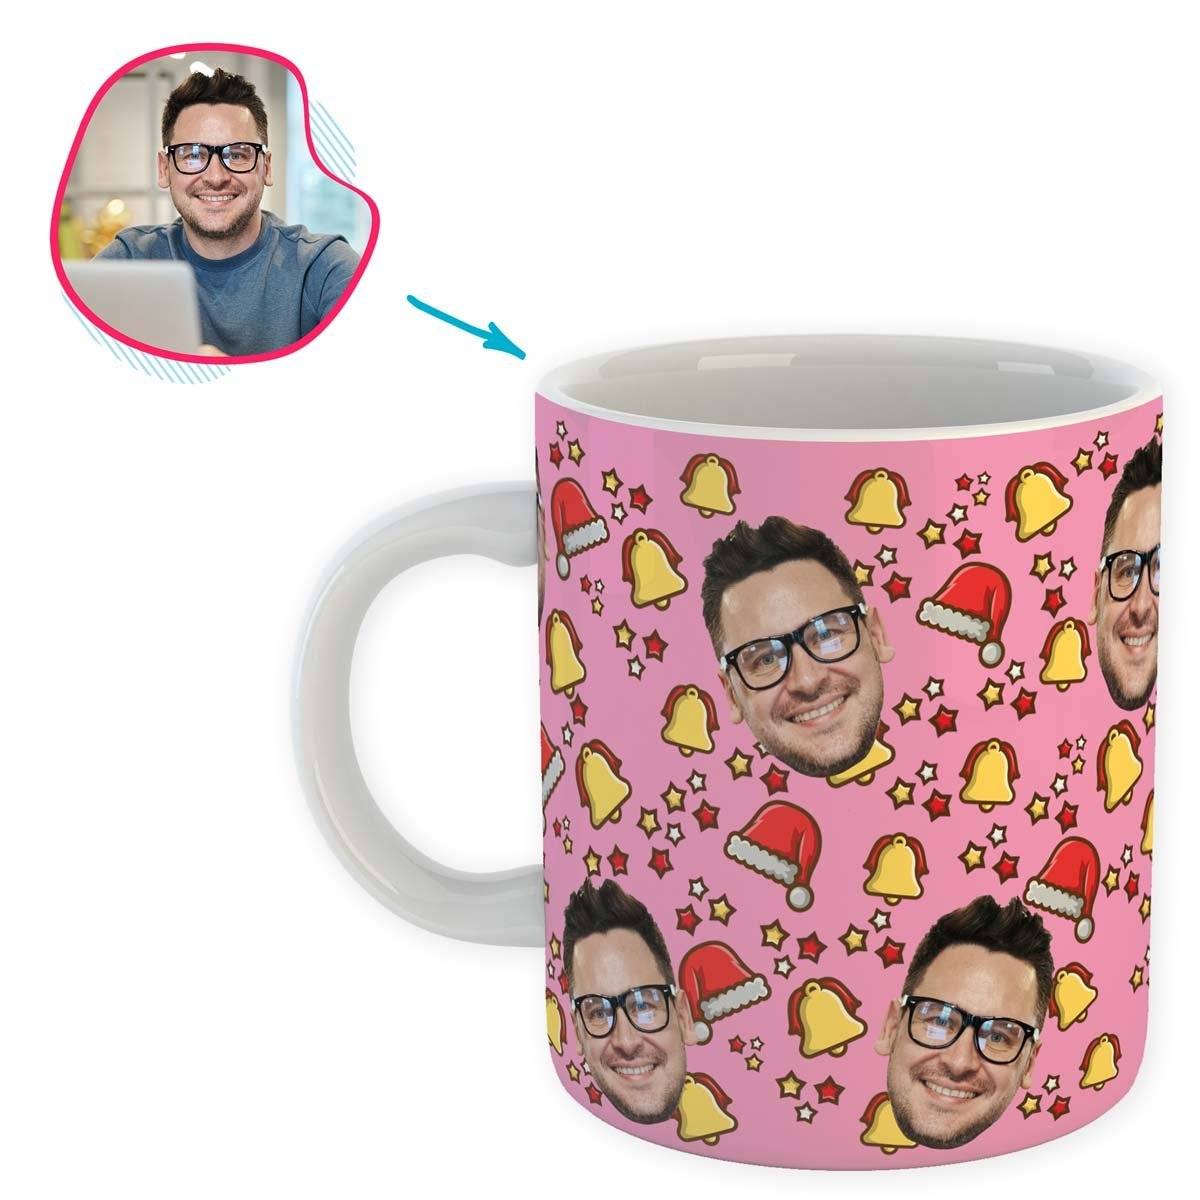 pink Santa's Hat mug personalized with photo of face printed on it